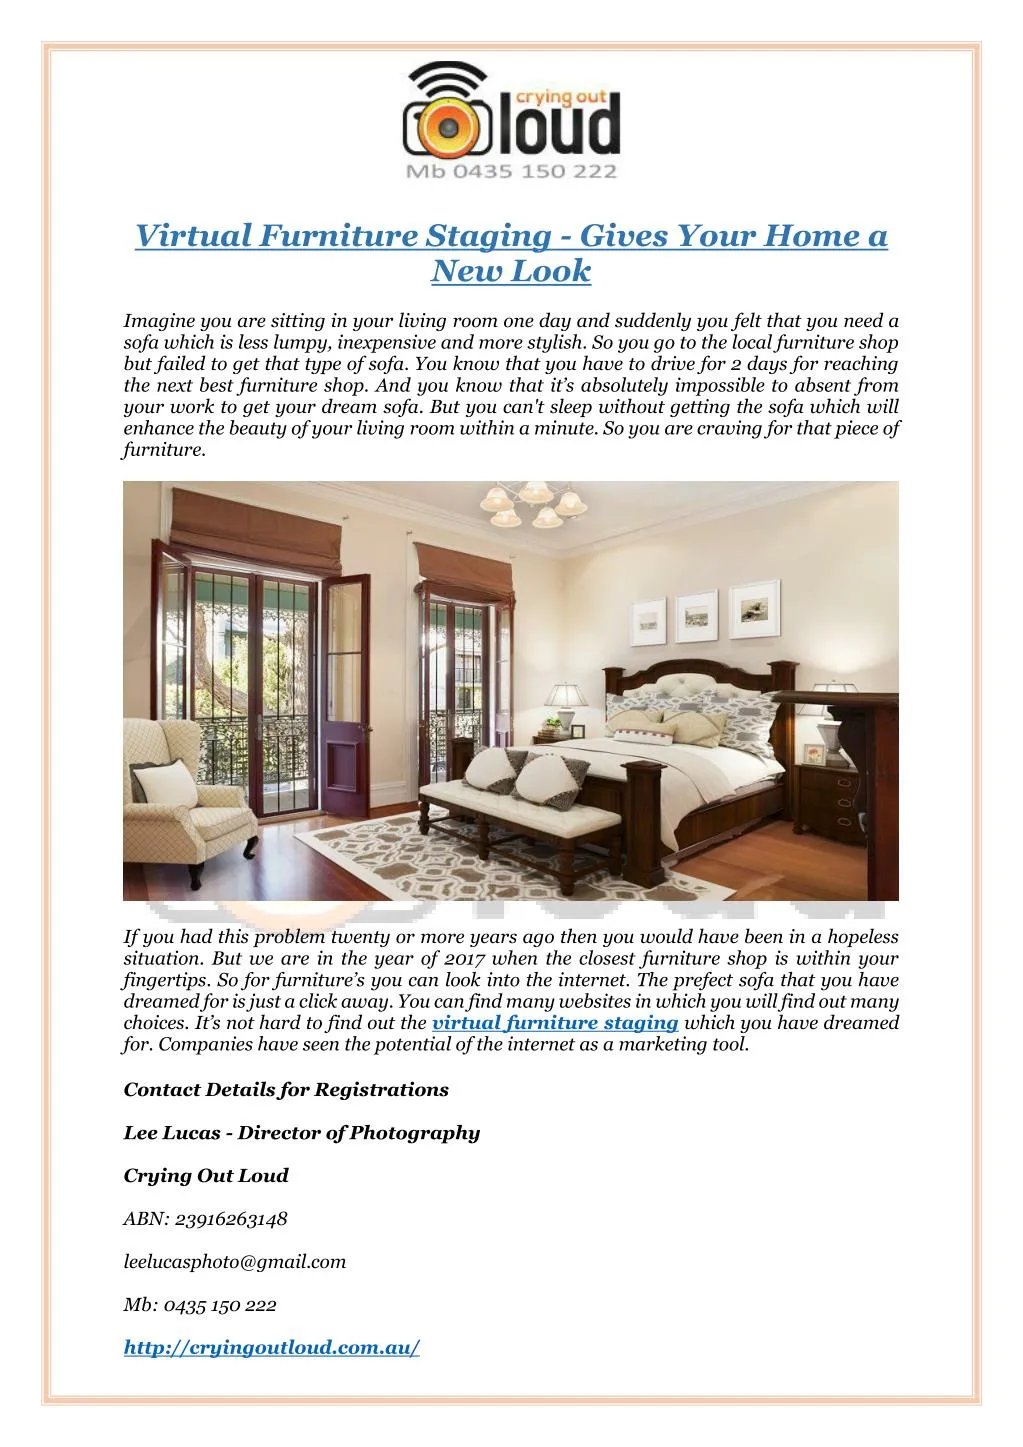 virtual furniture staging gives your home